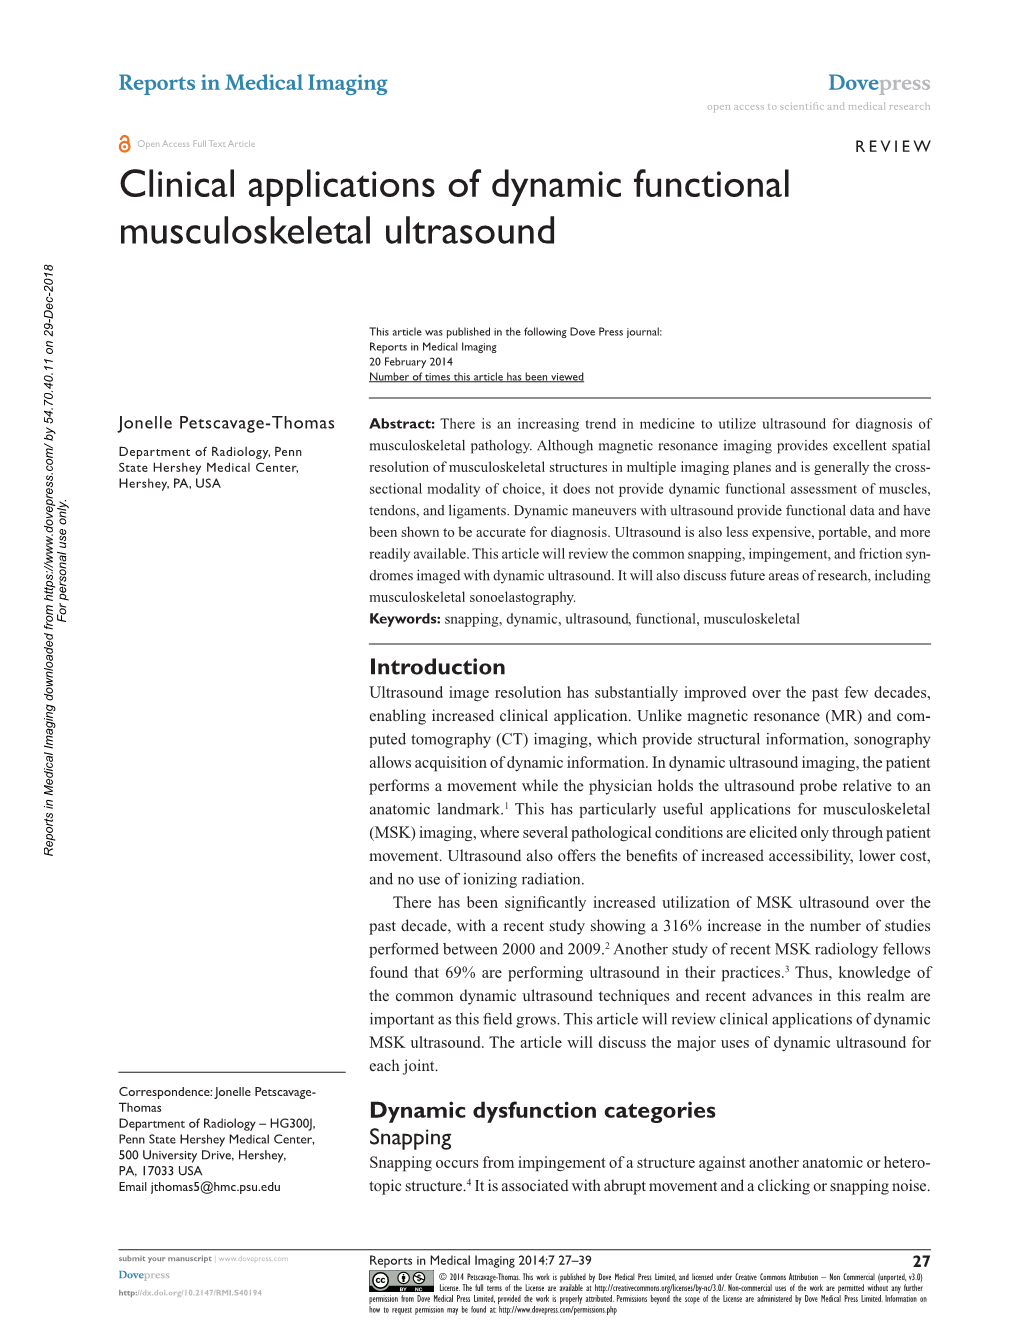 Clinical Applications of Dynamic Functional Musculoskeletal Ultrasound